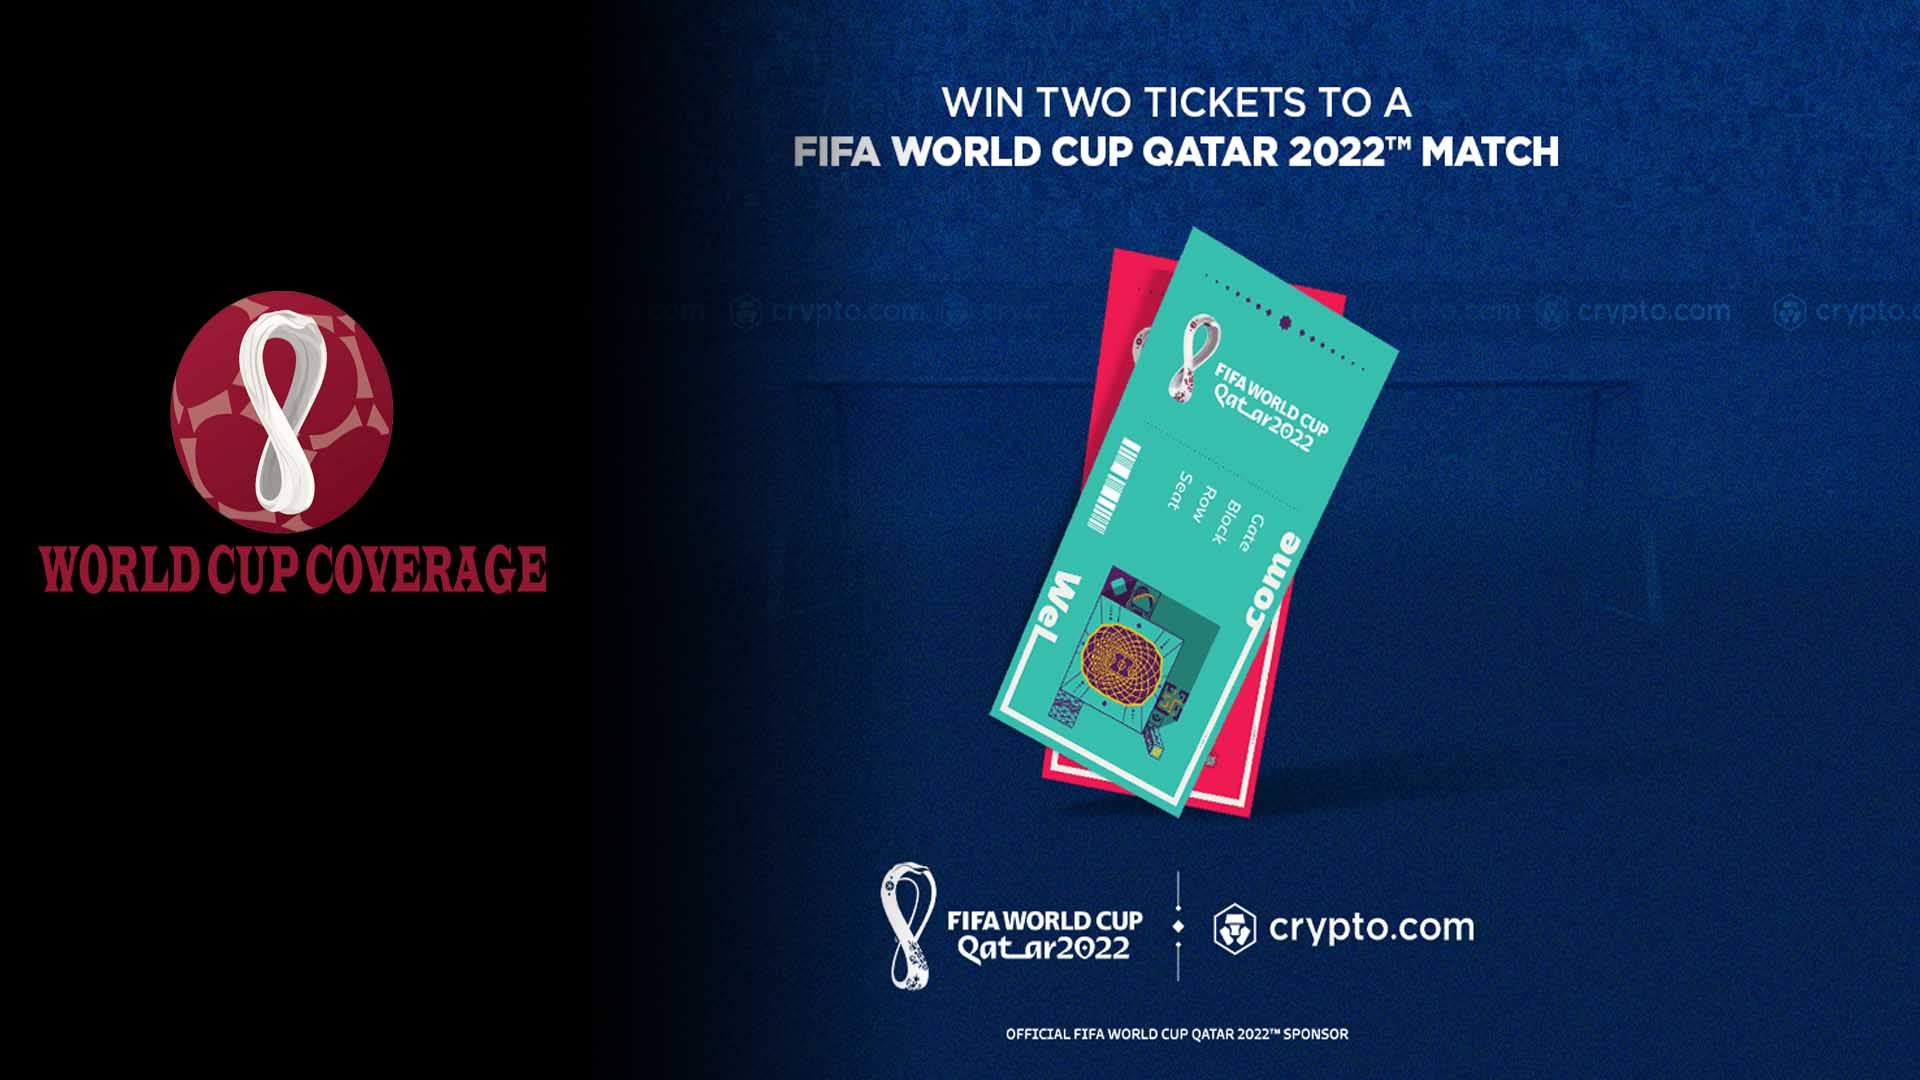 Last Chance to Buy FIFA World Cup Tickets